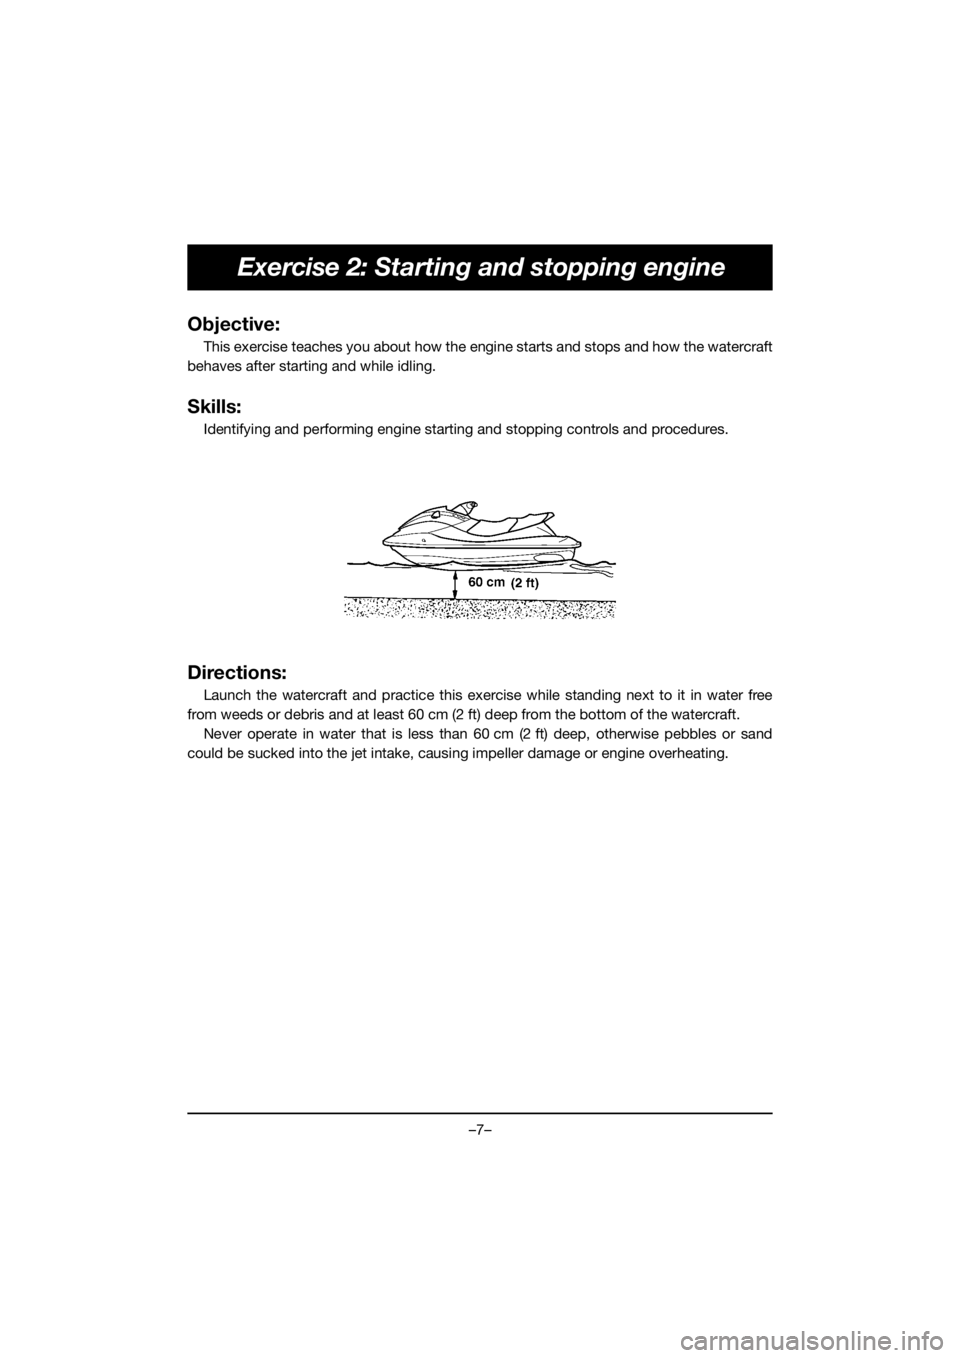 YAMAHA EX SPORT 2020  Manuale duso (in Italian) –7–
Exercise 2: Starting and stopping engine
Objective:
This exercise teaches you about how the engine starts and stops and how the watercraft
behaves after starting and while idling.
Skills:
Iden